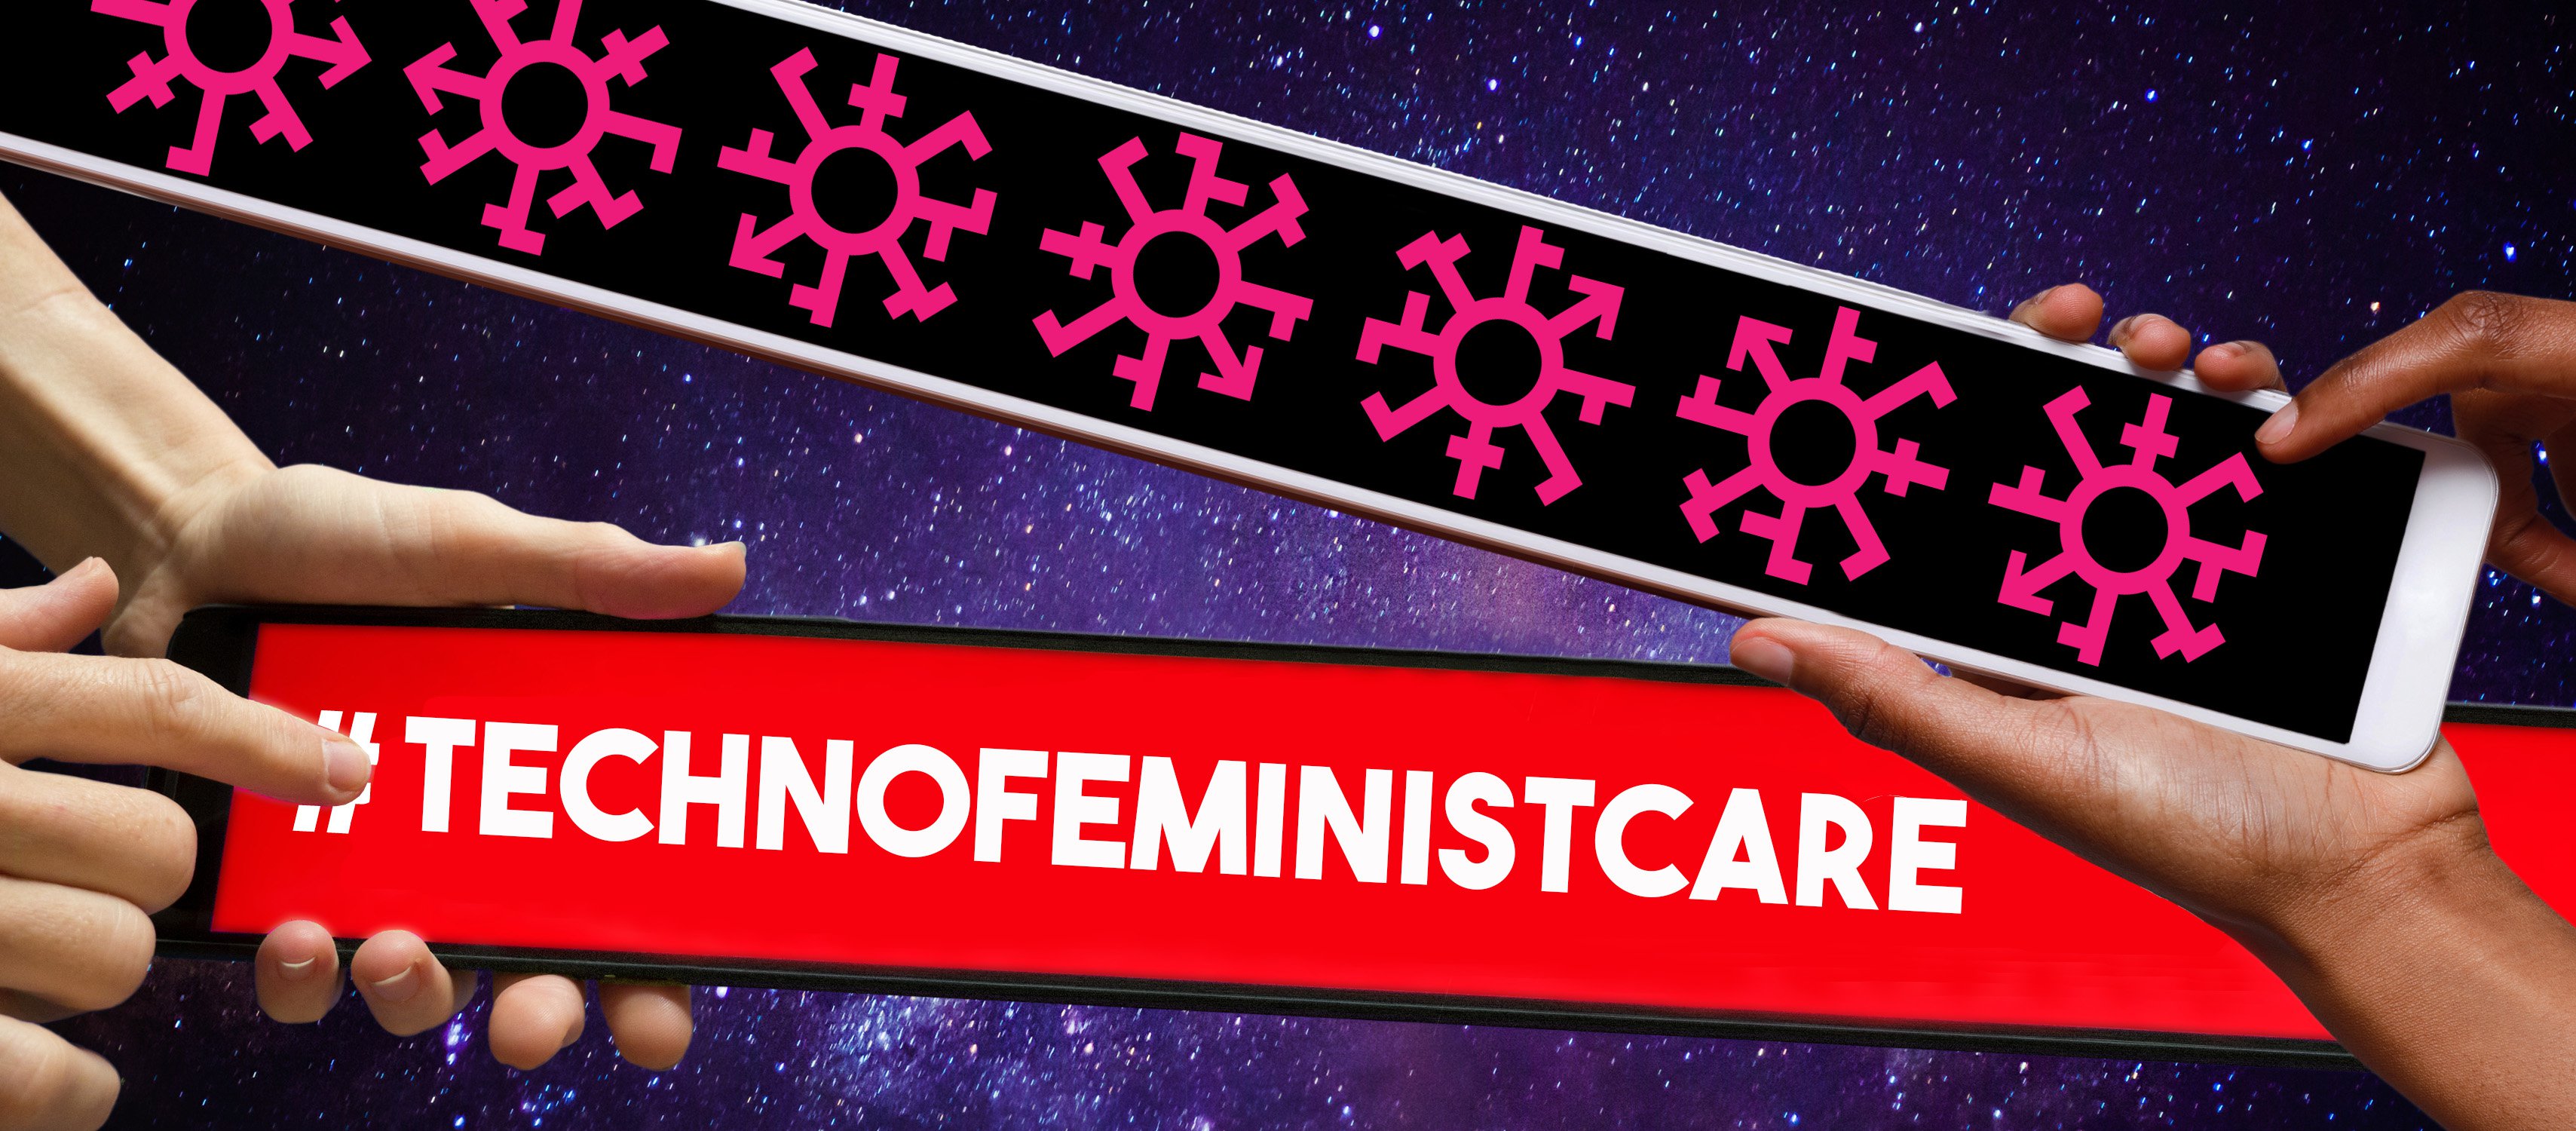 banner of a elongated cell phone with red stars running down the screen, a second screen has a red background says #technofeministcare in white